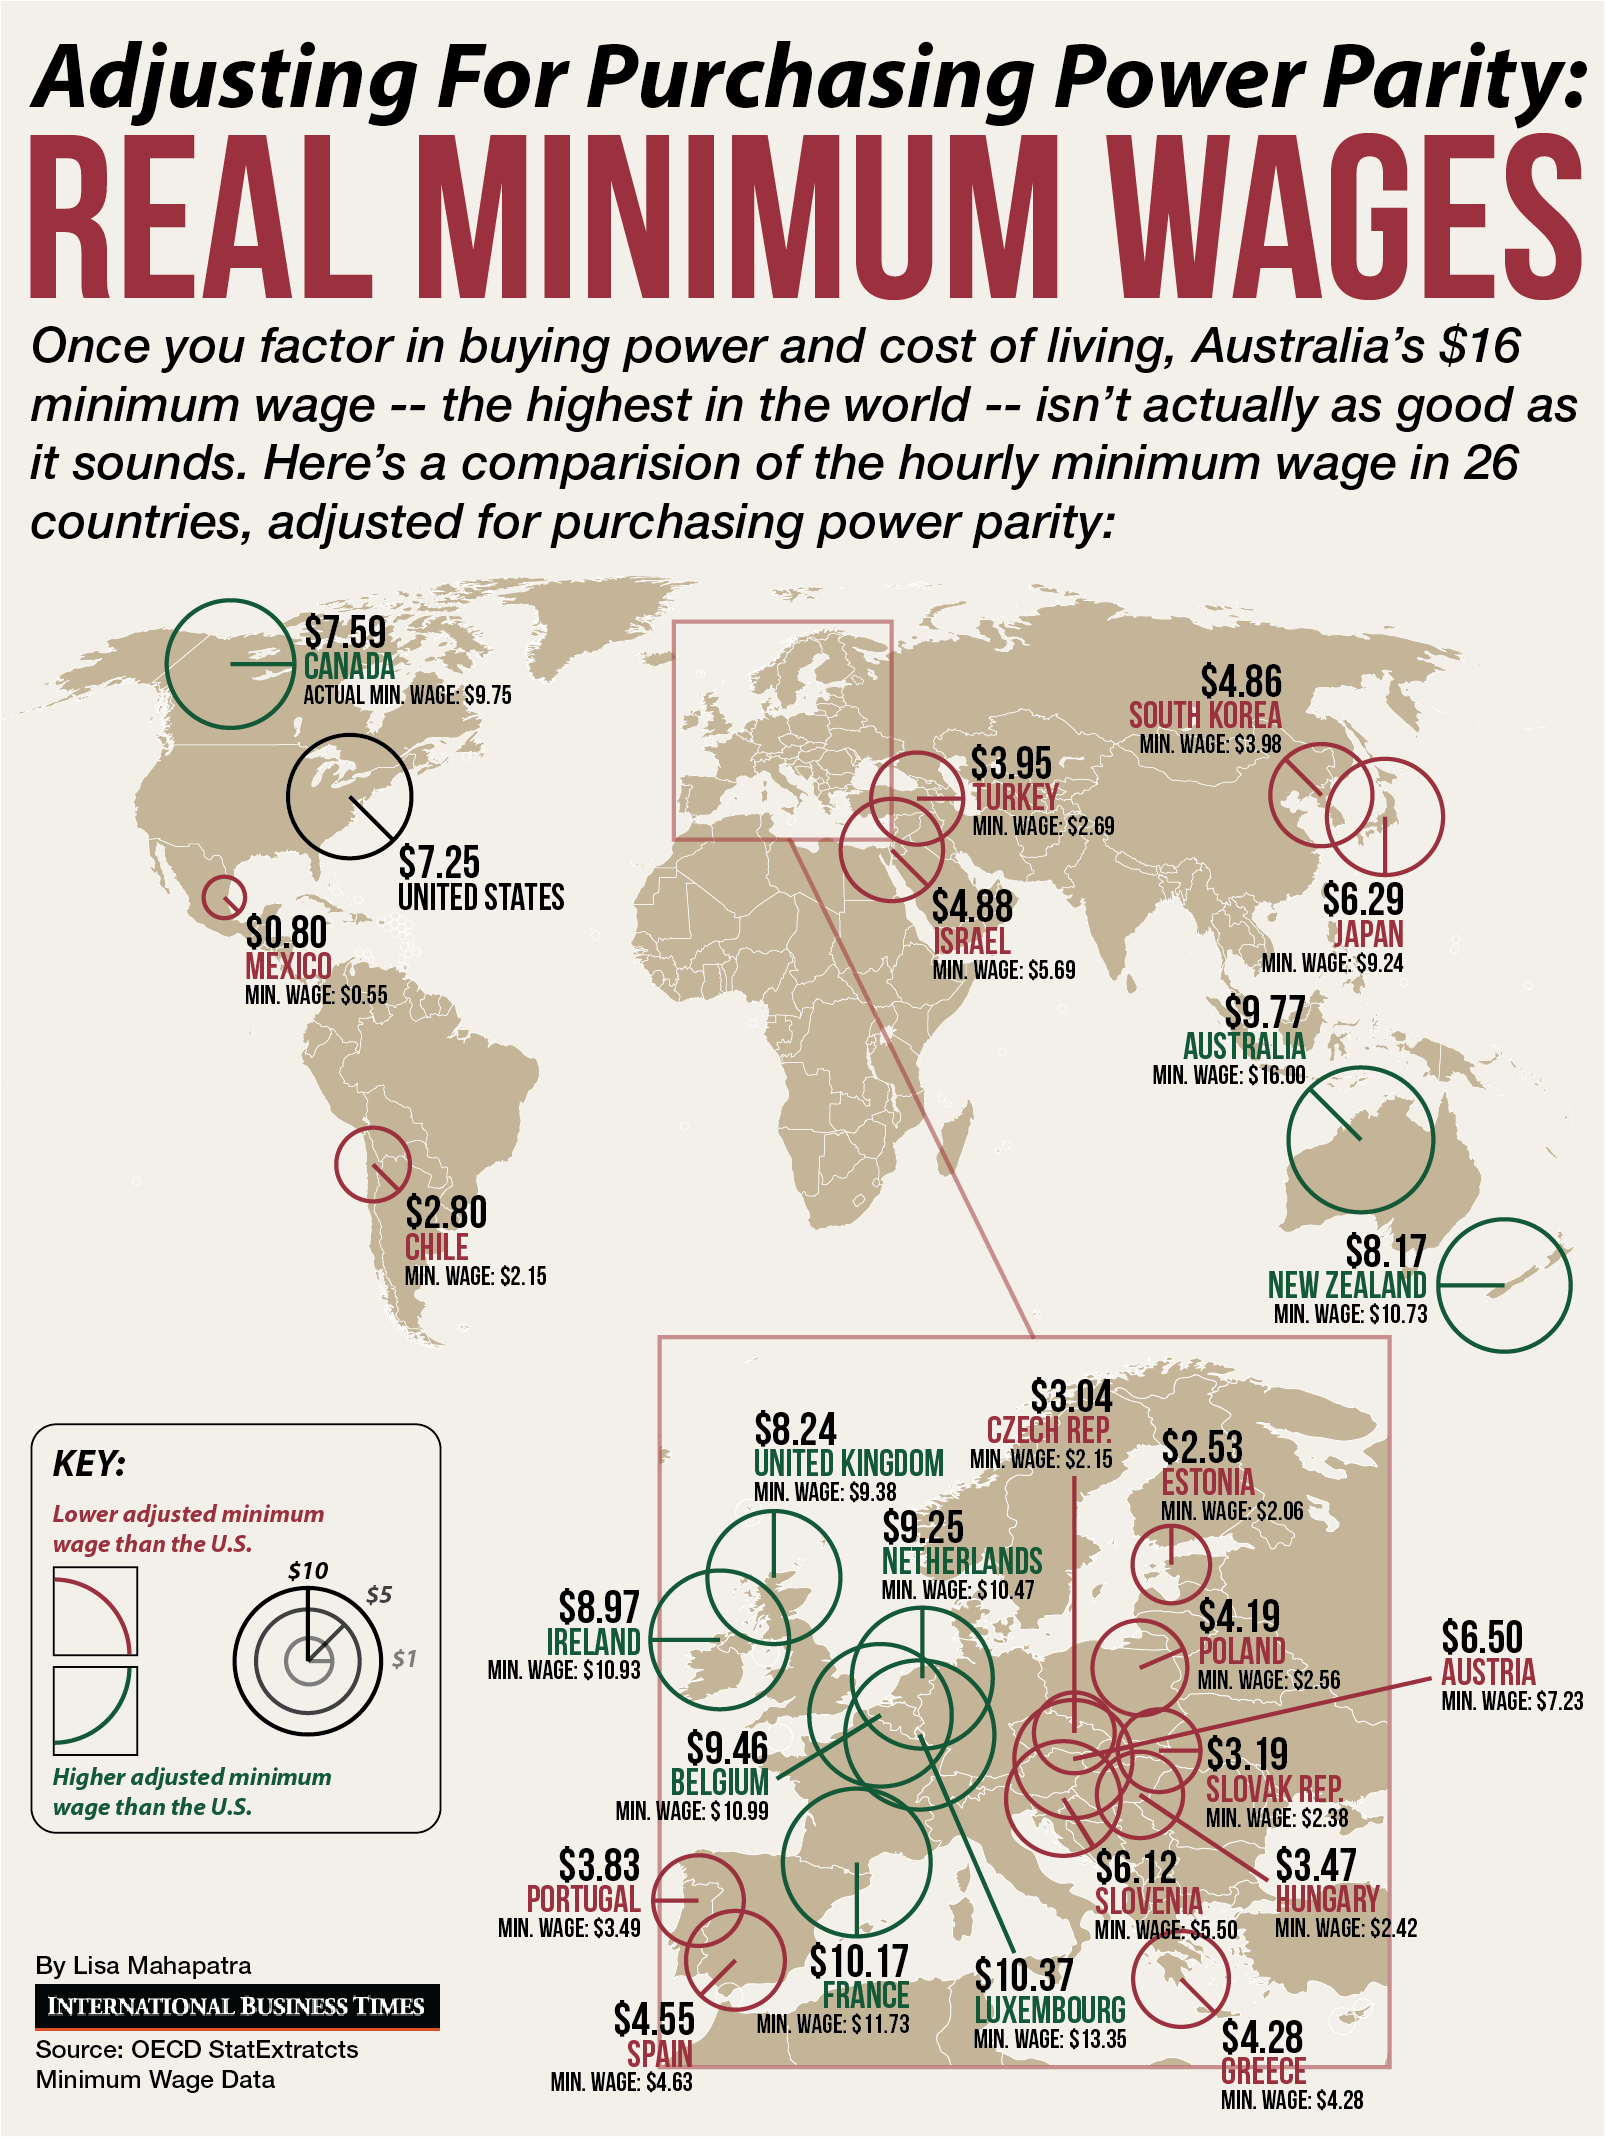 Minimum Wage And Purchasing Power Parity Only Nine Countries Have A